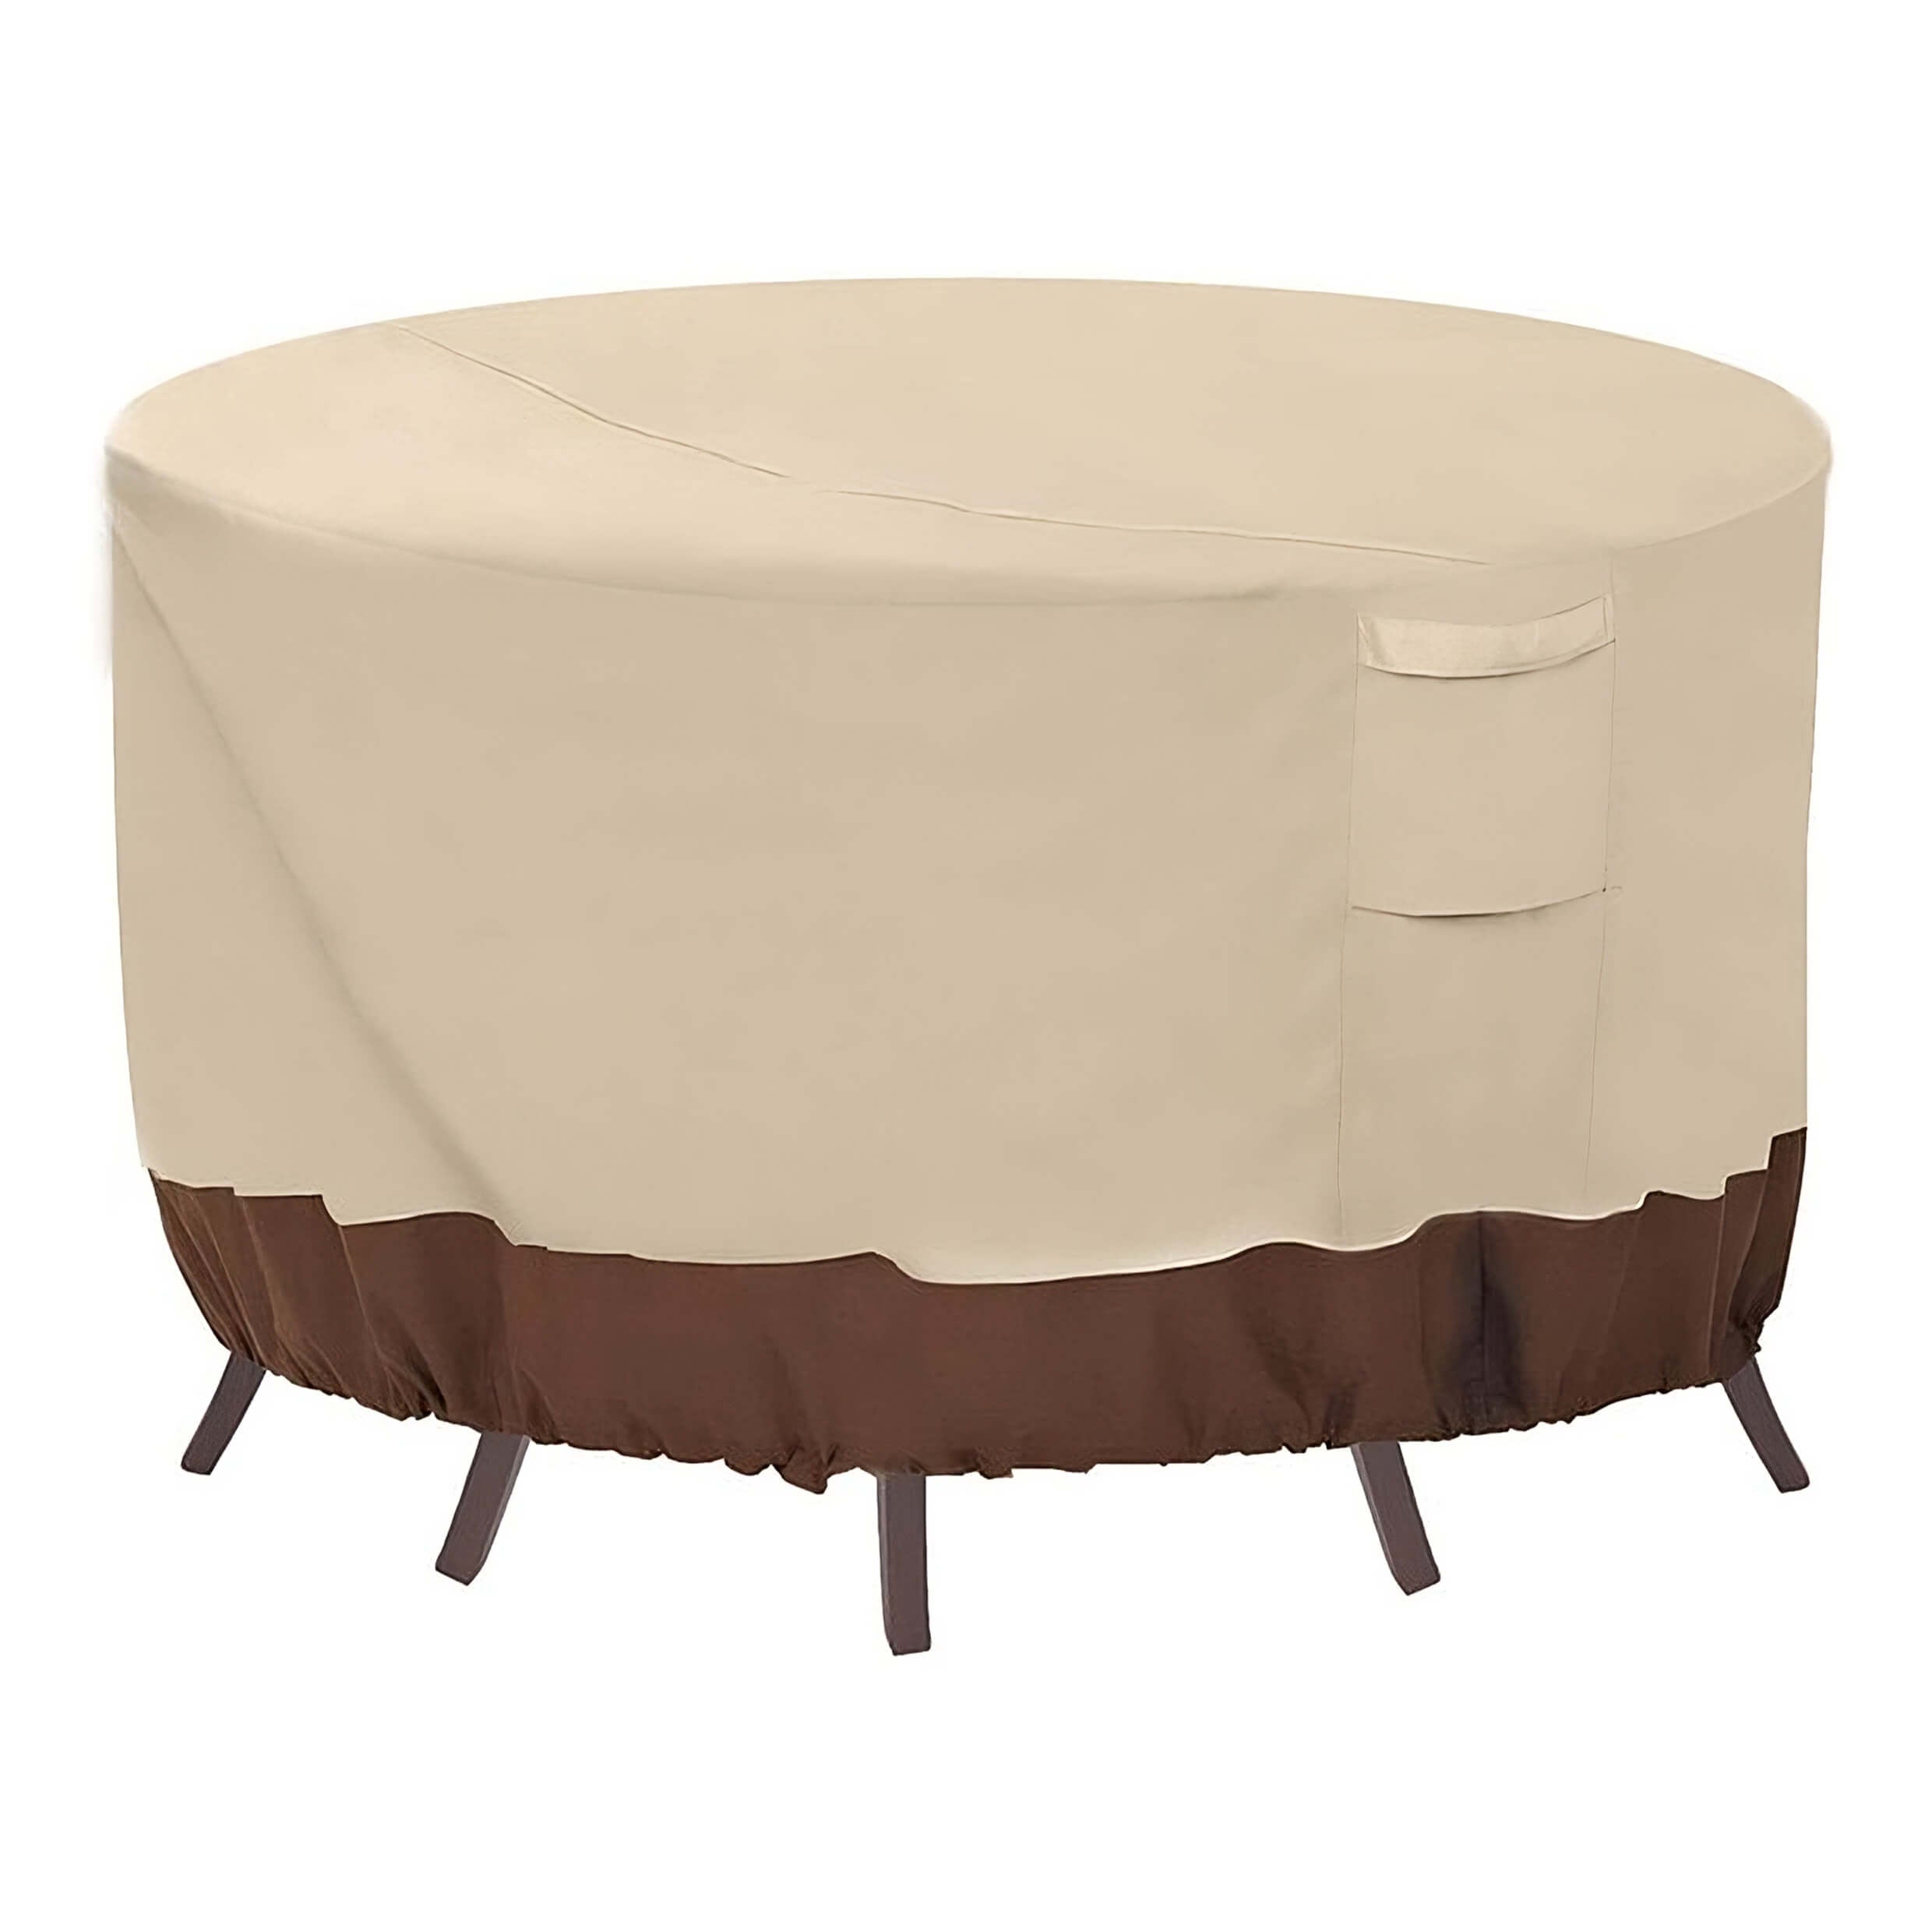 Outdoor Round Waterproof Patio Table Covers